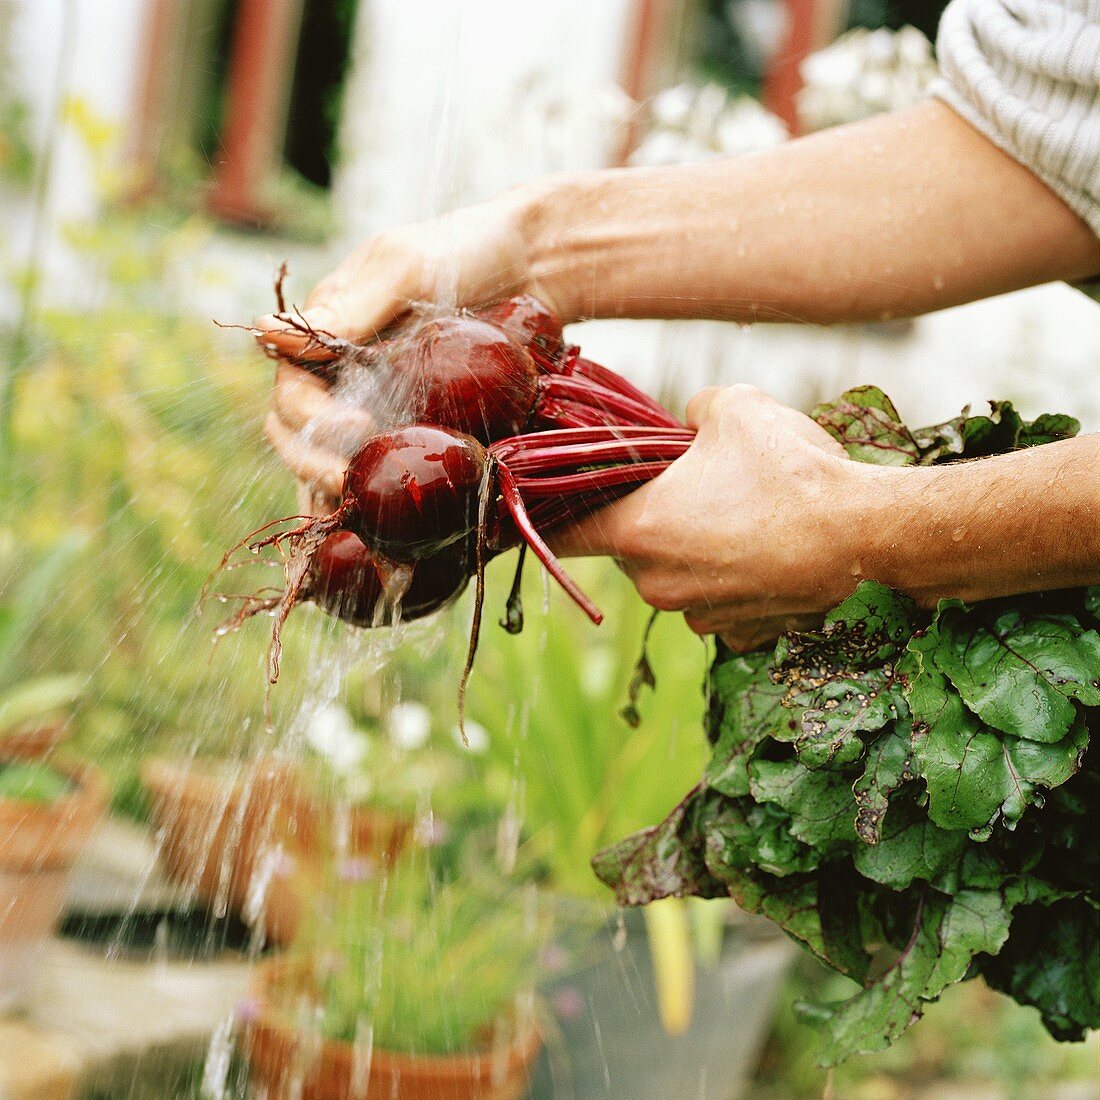 Hands washing beetroot under running water in front of house